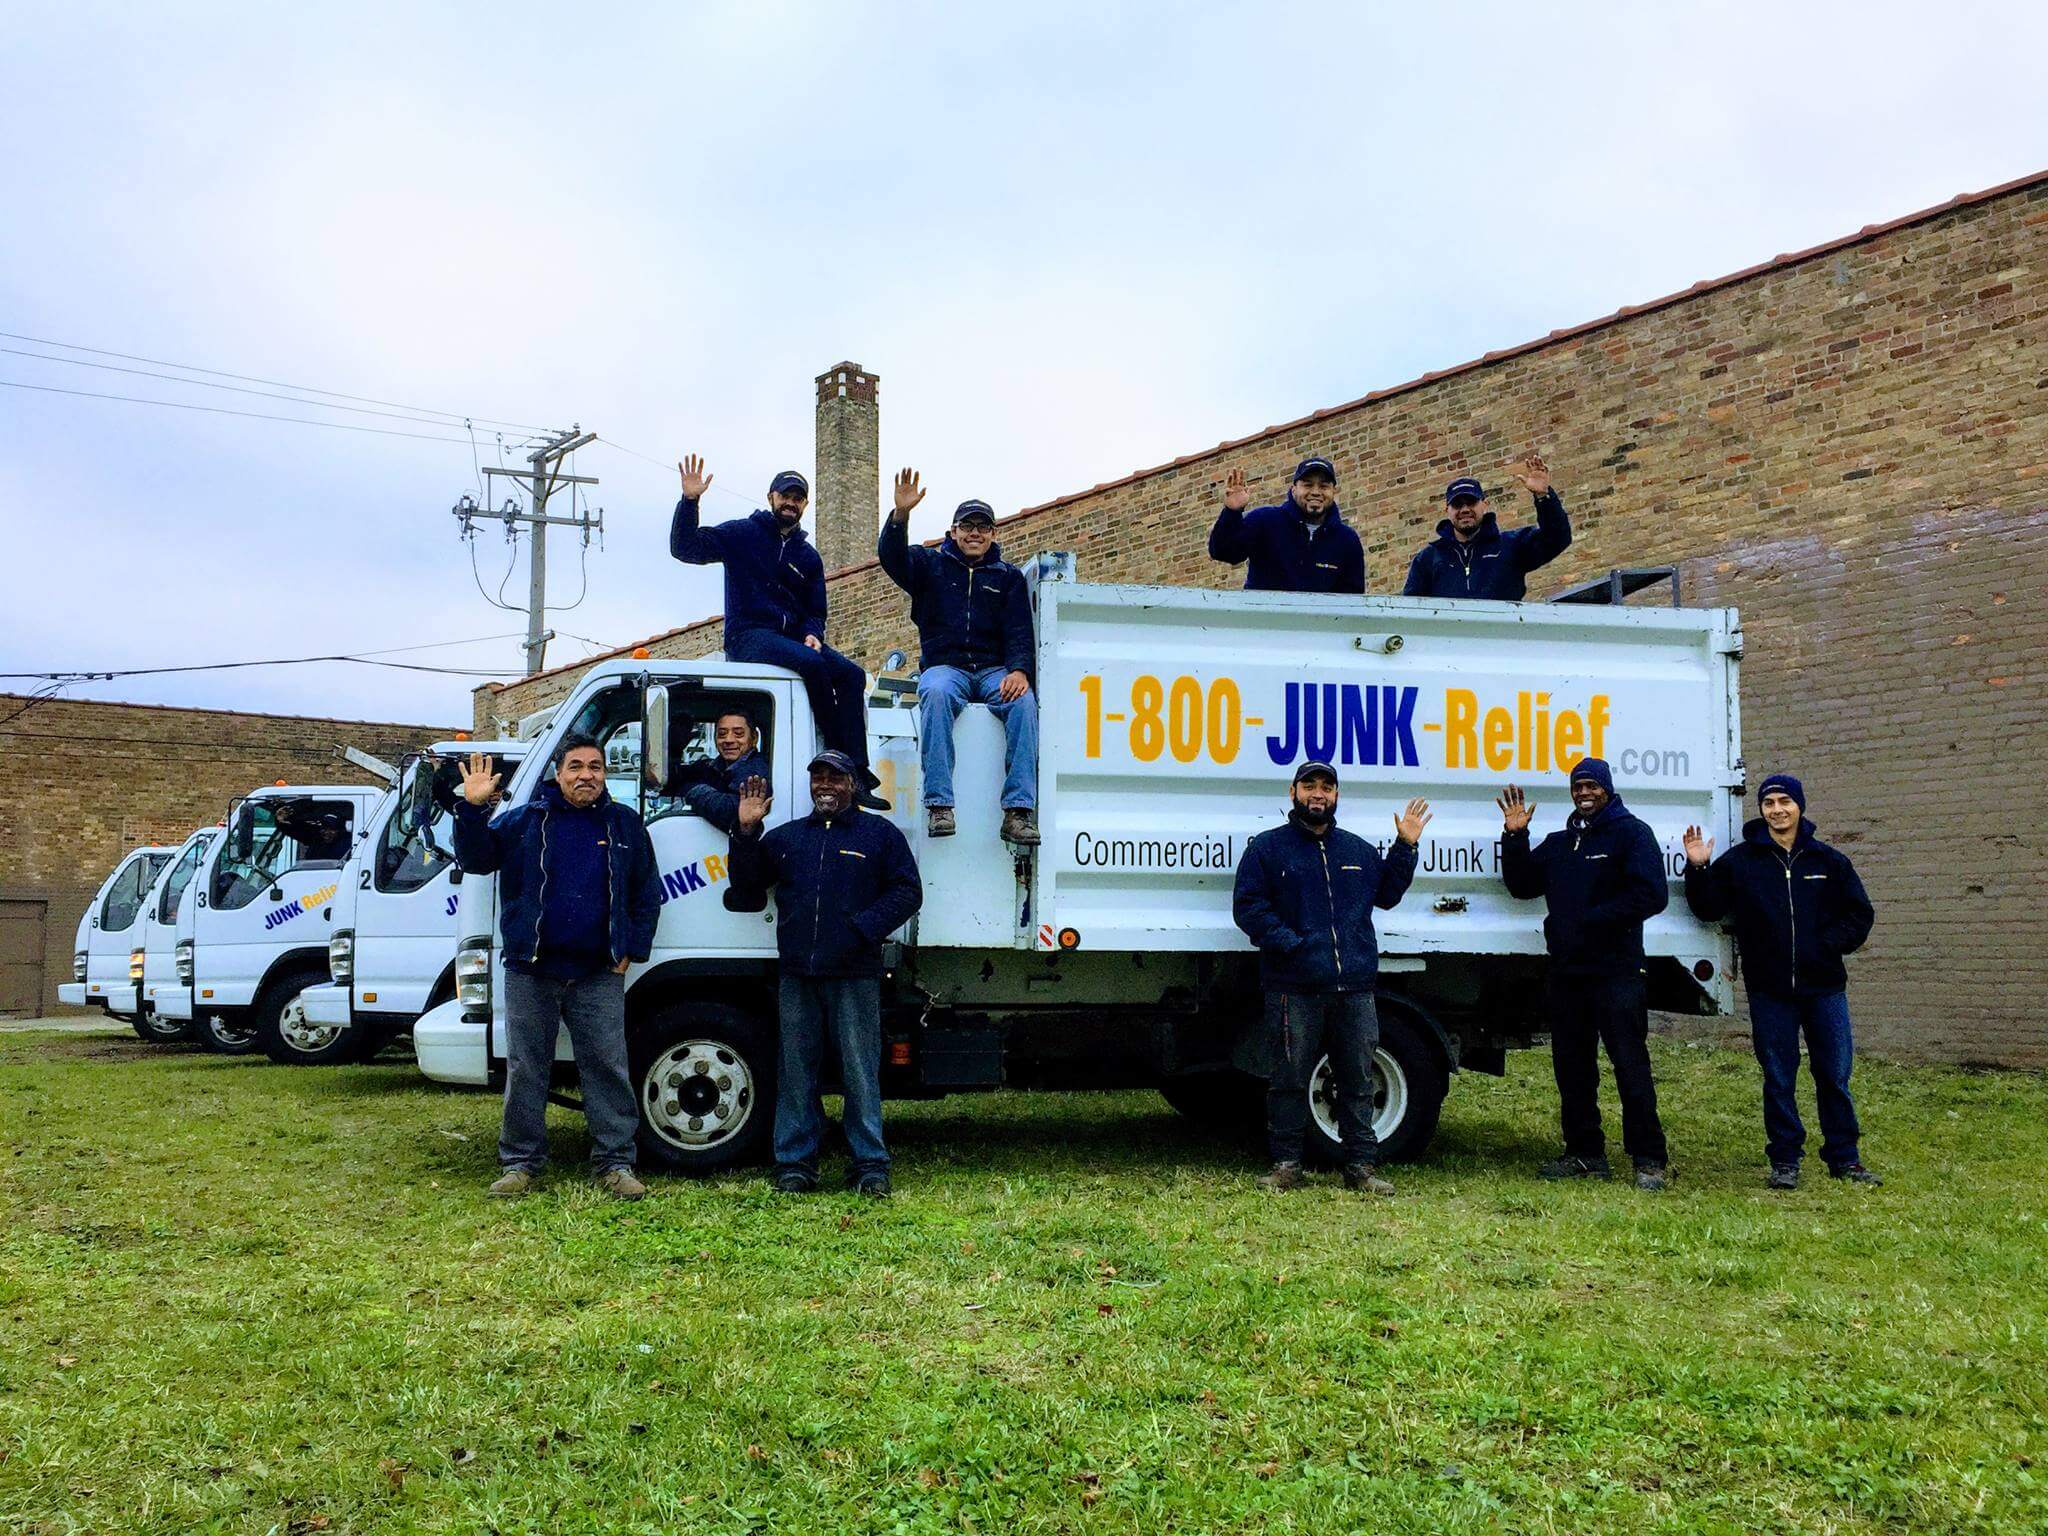 A picture of the Junk Removal Specialist team smiling and waving that helps our customers in the city of chicago and chicagoland suburbs | Junk Relief Chicago